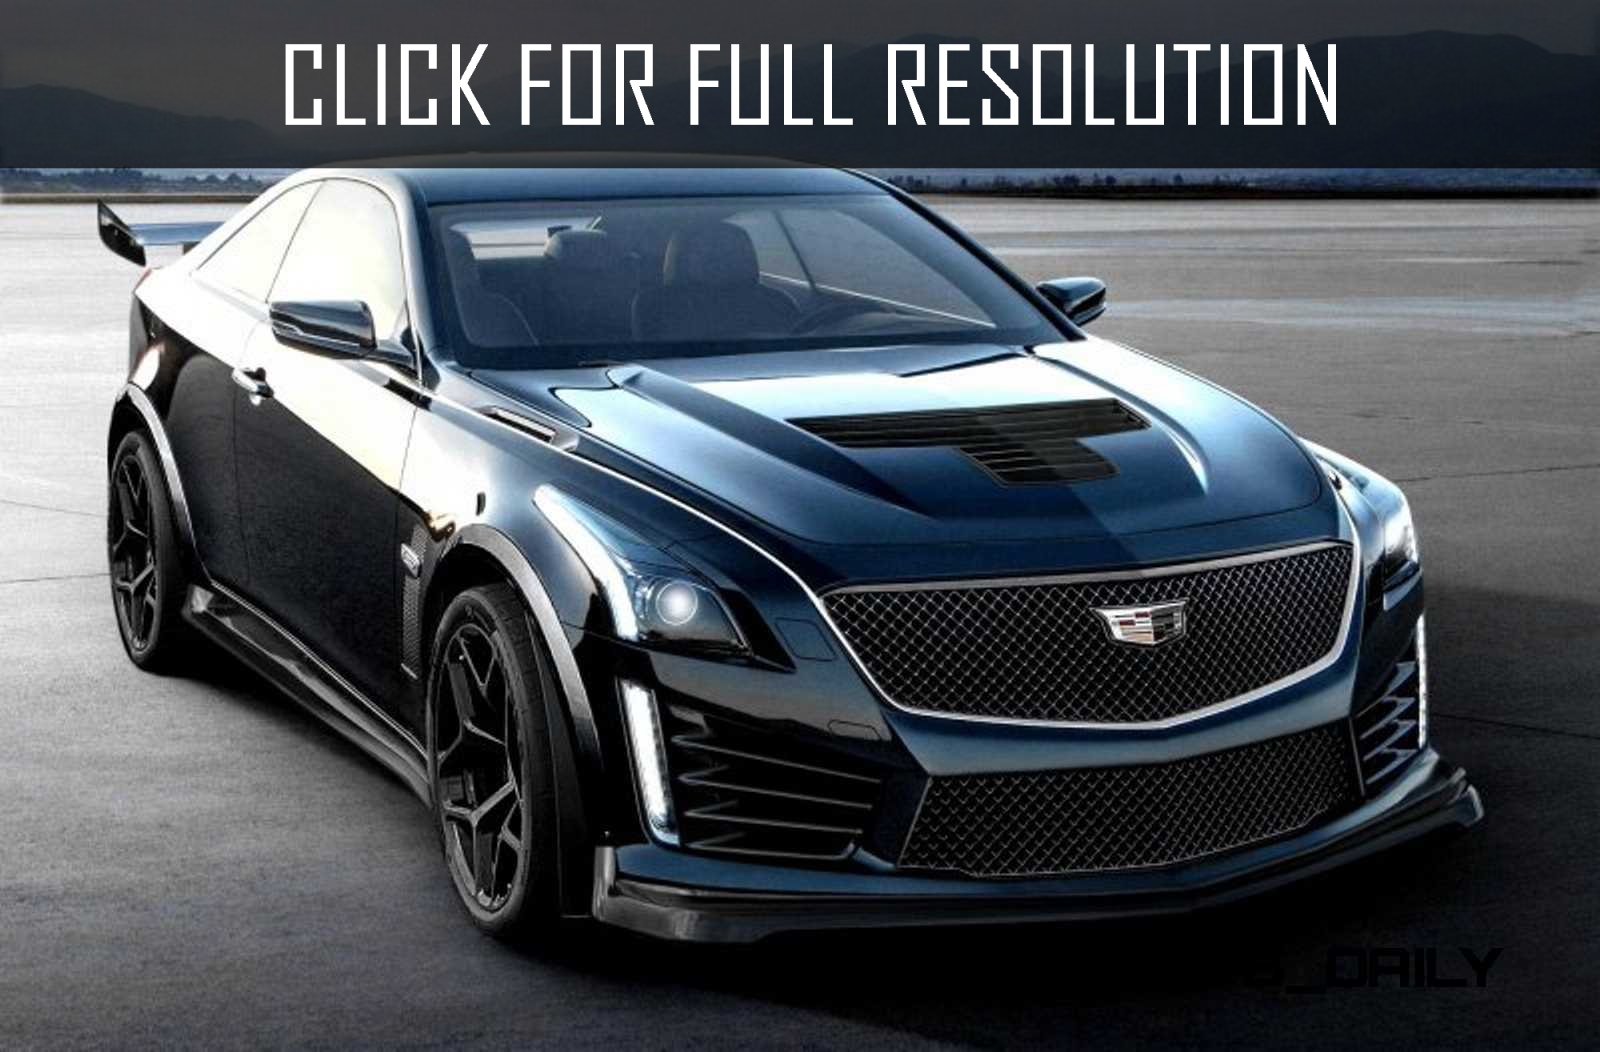 2016 Cadillac Cts Coupe